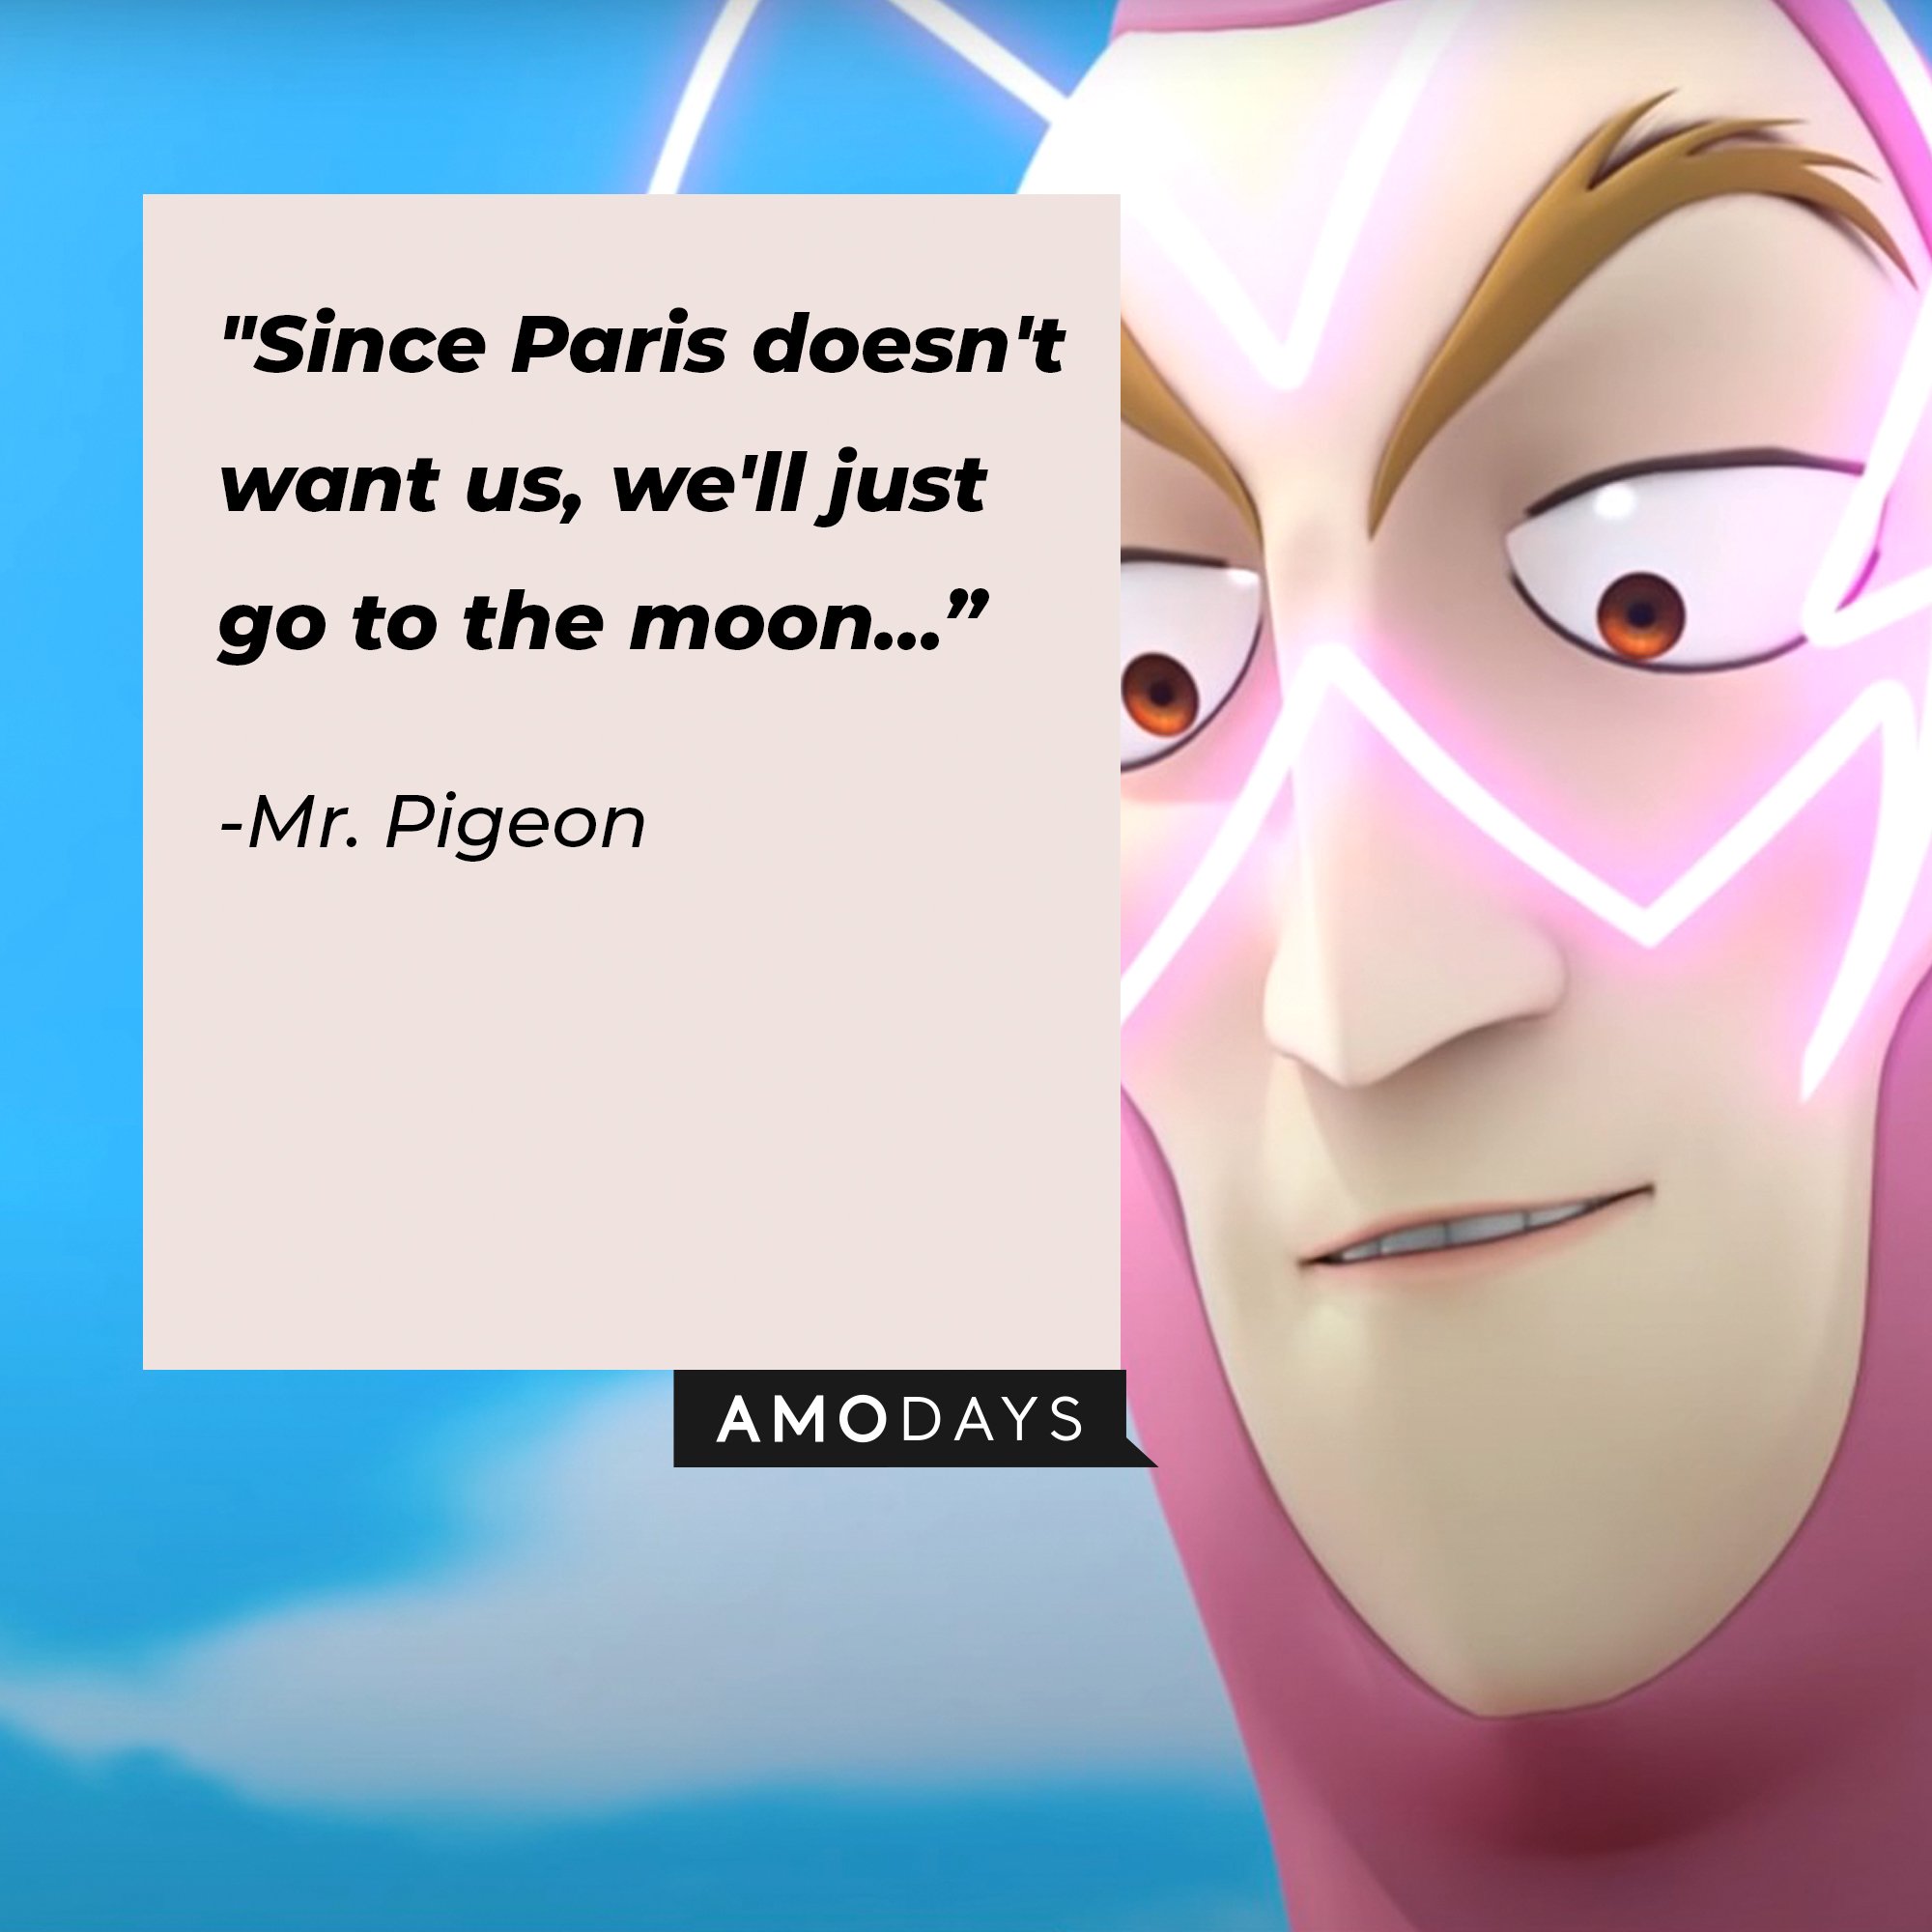 Mr. Pigeon’s quote: "Since Paris doesn't want us, we'll just go to the moon…"  | Image: AmoDays